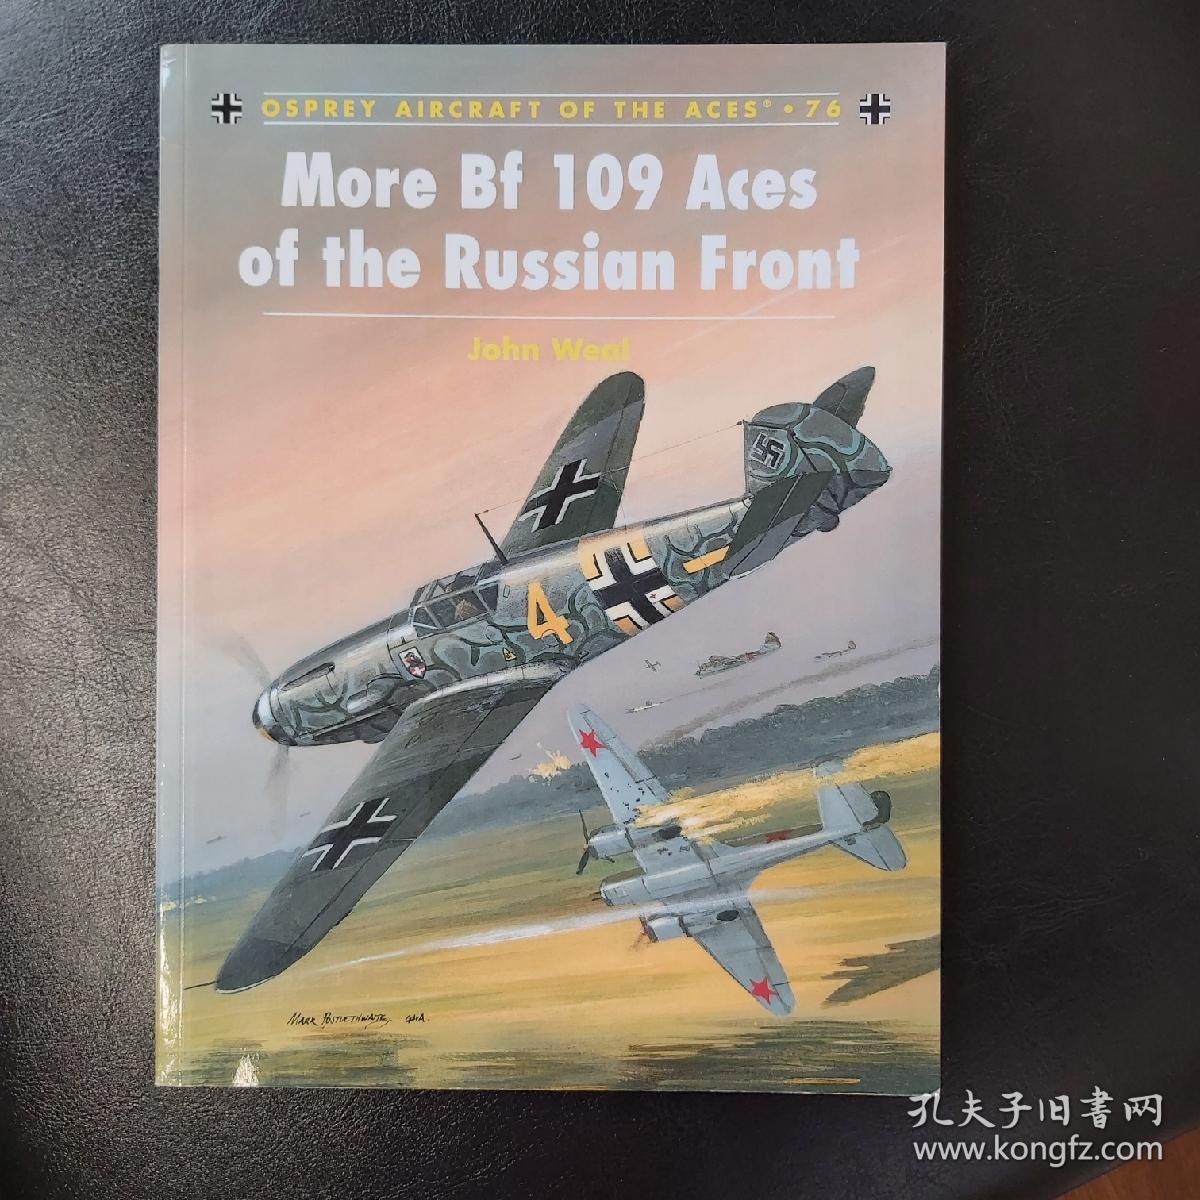 More Bf 109 Aces of the Russian Front